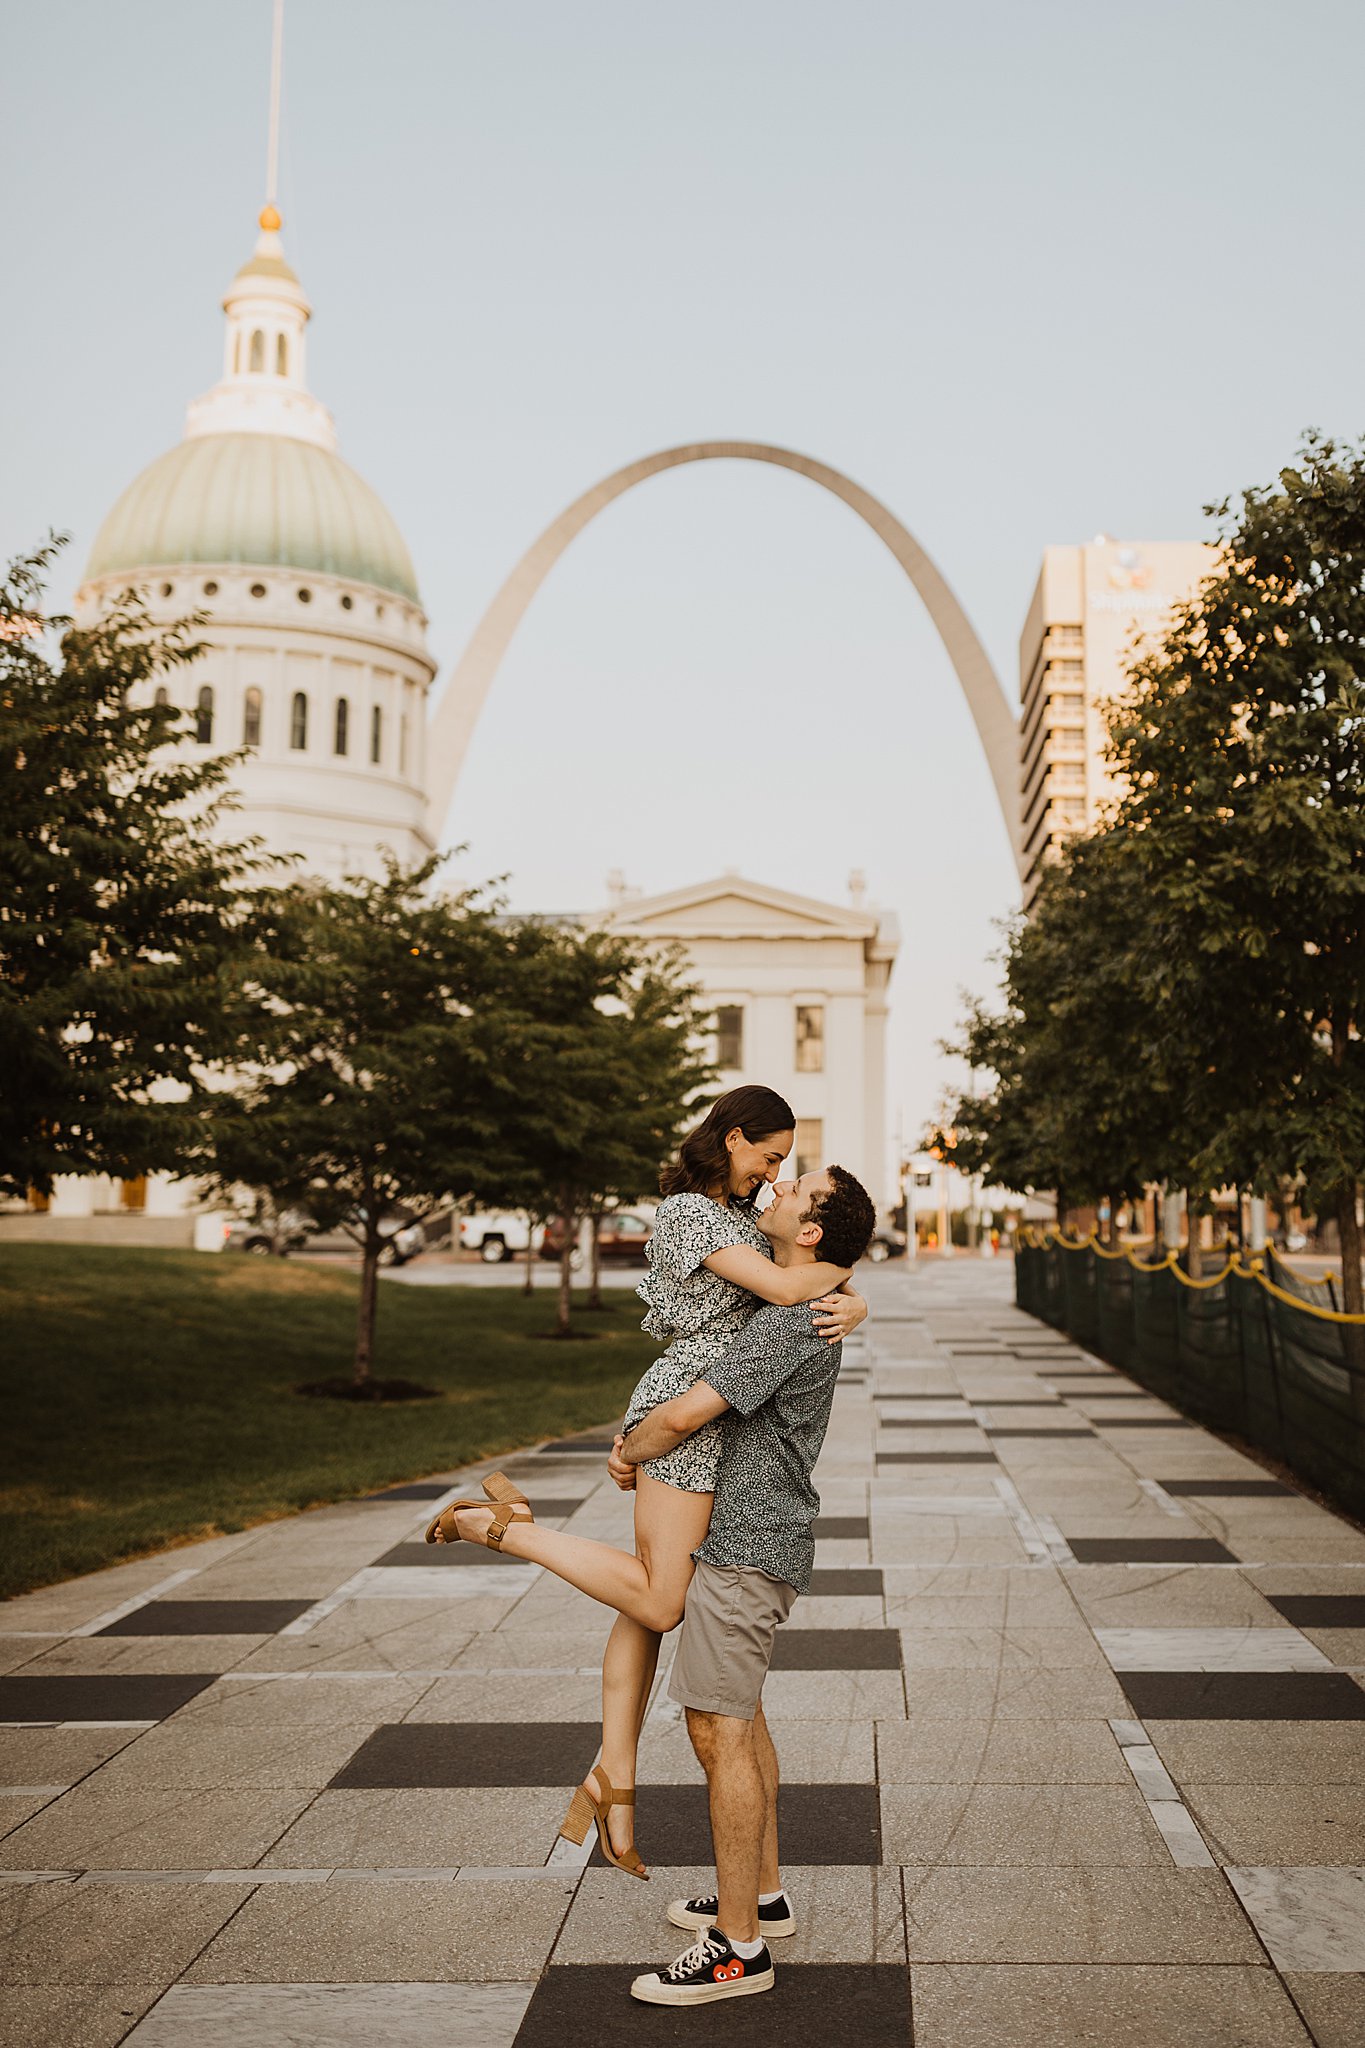 Engagement Photos at the St. Louis Arch